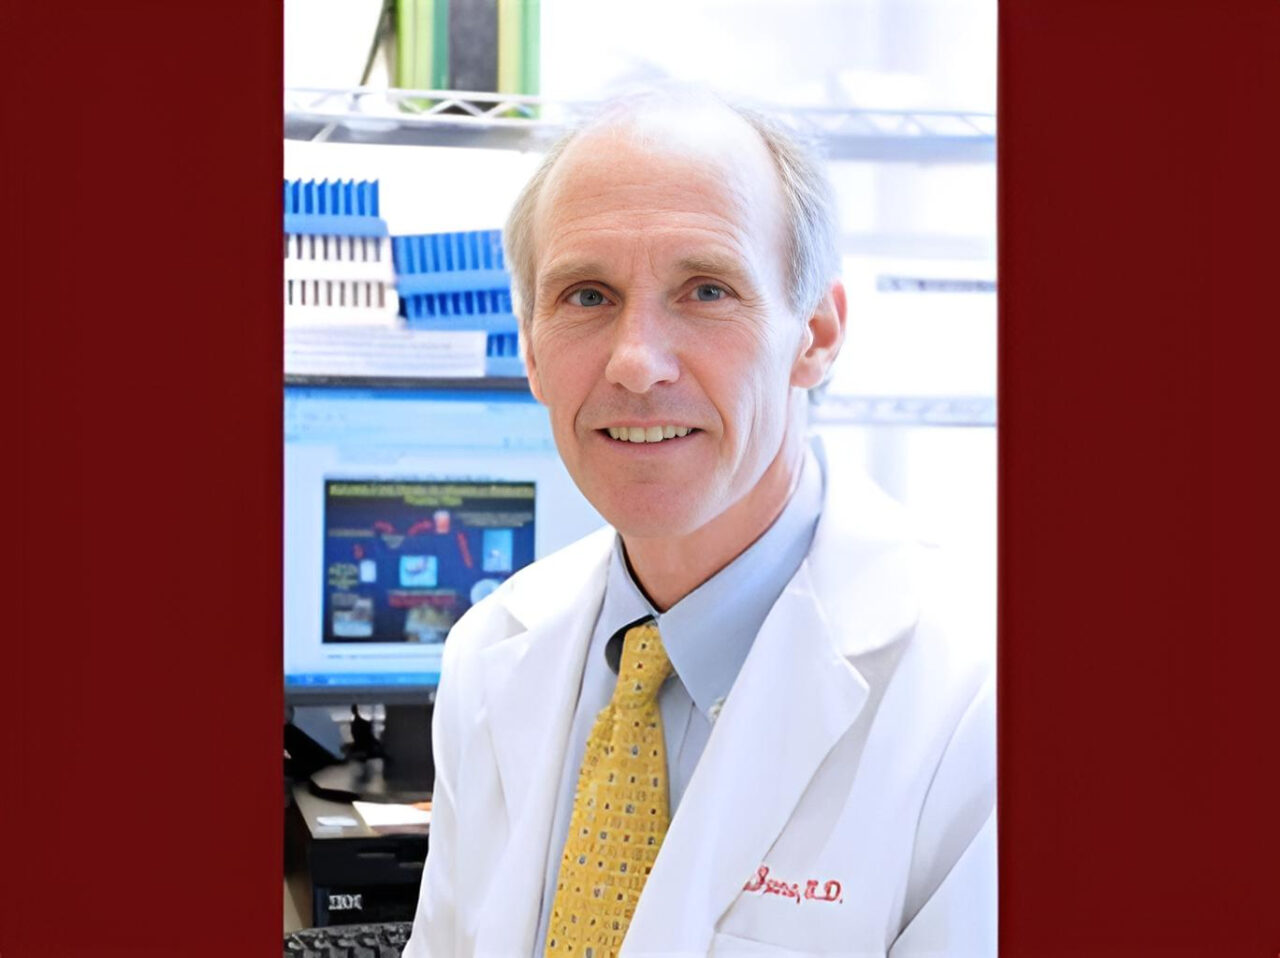 Dr. Carl June was awarded the 2024 Break through Prize in Life Sciences for the development of CART cell therapy – Penn Medicine, University of Pennsylvania Health System